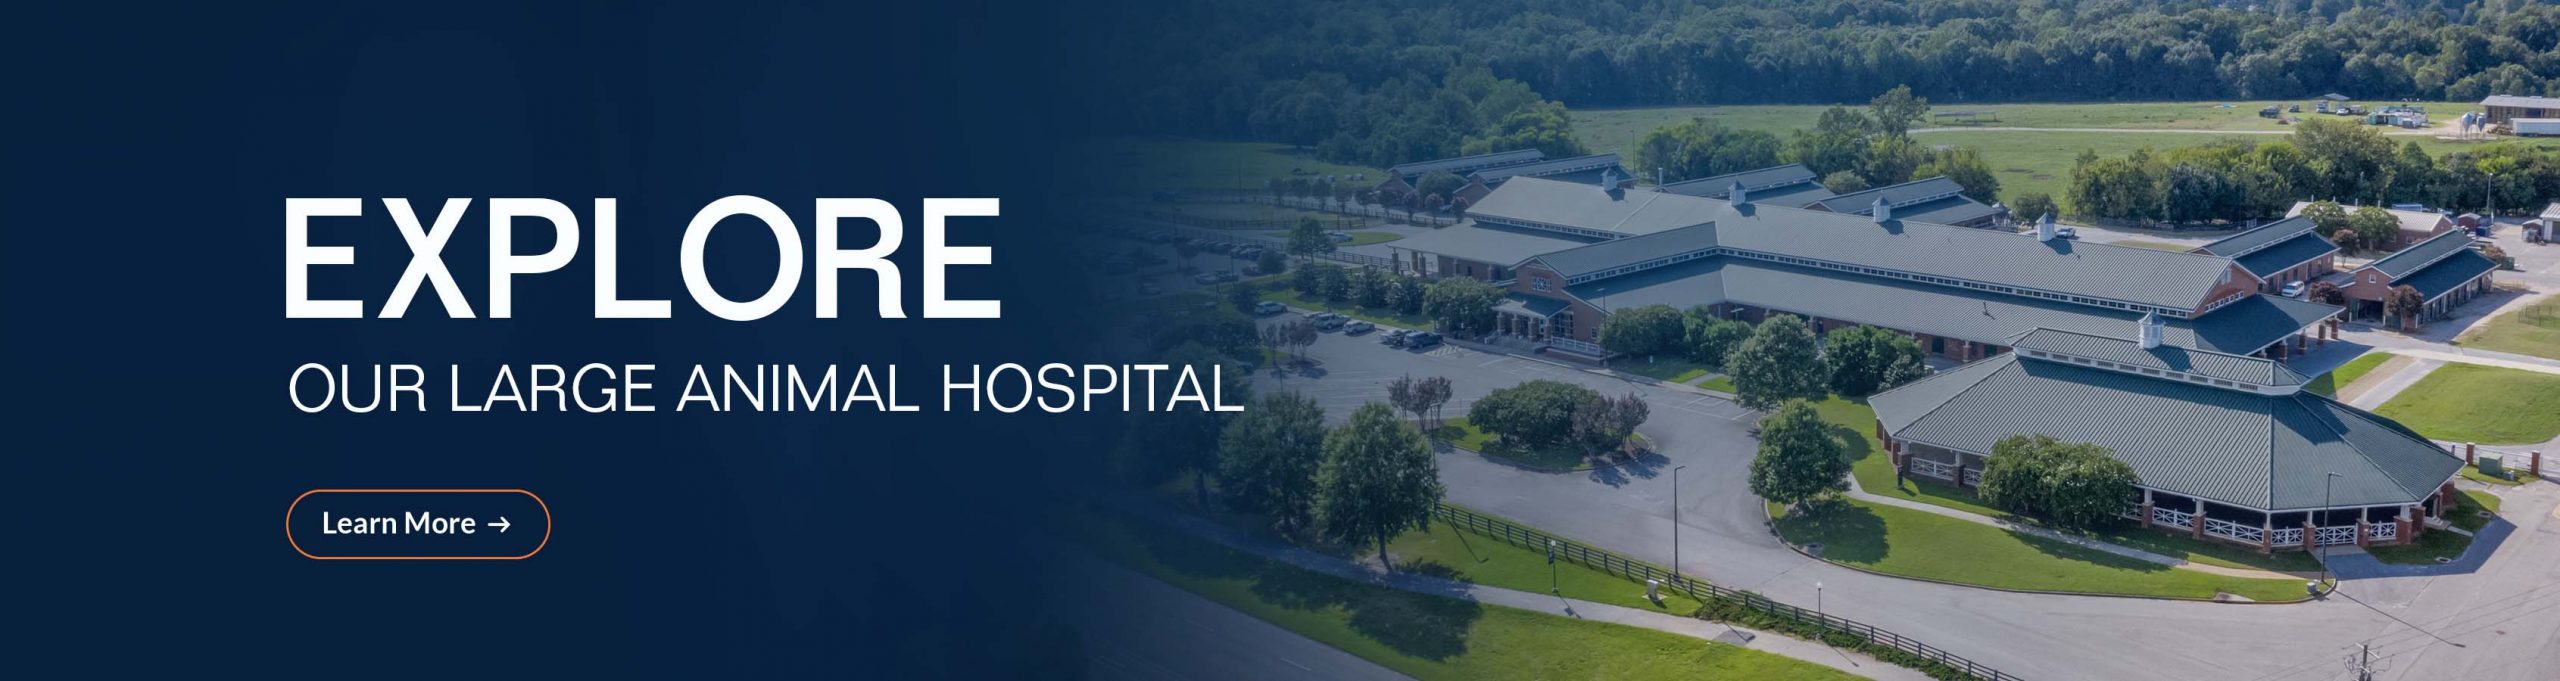 Explore our Large Animal Hospital